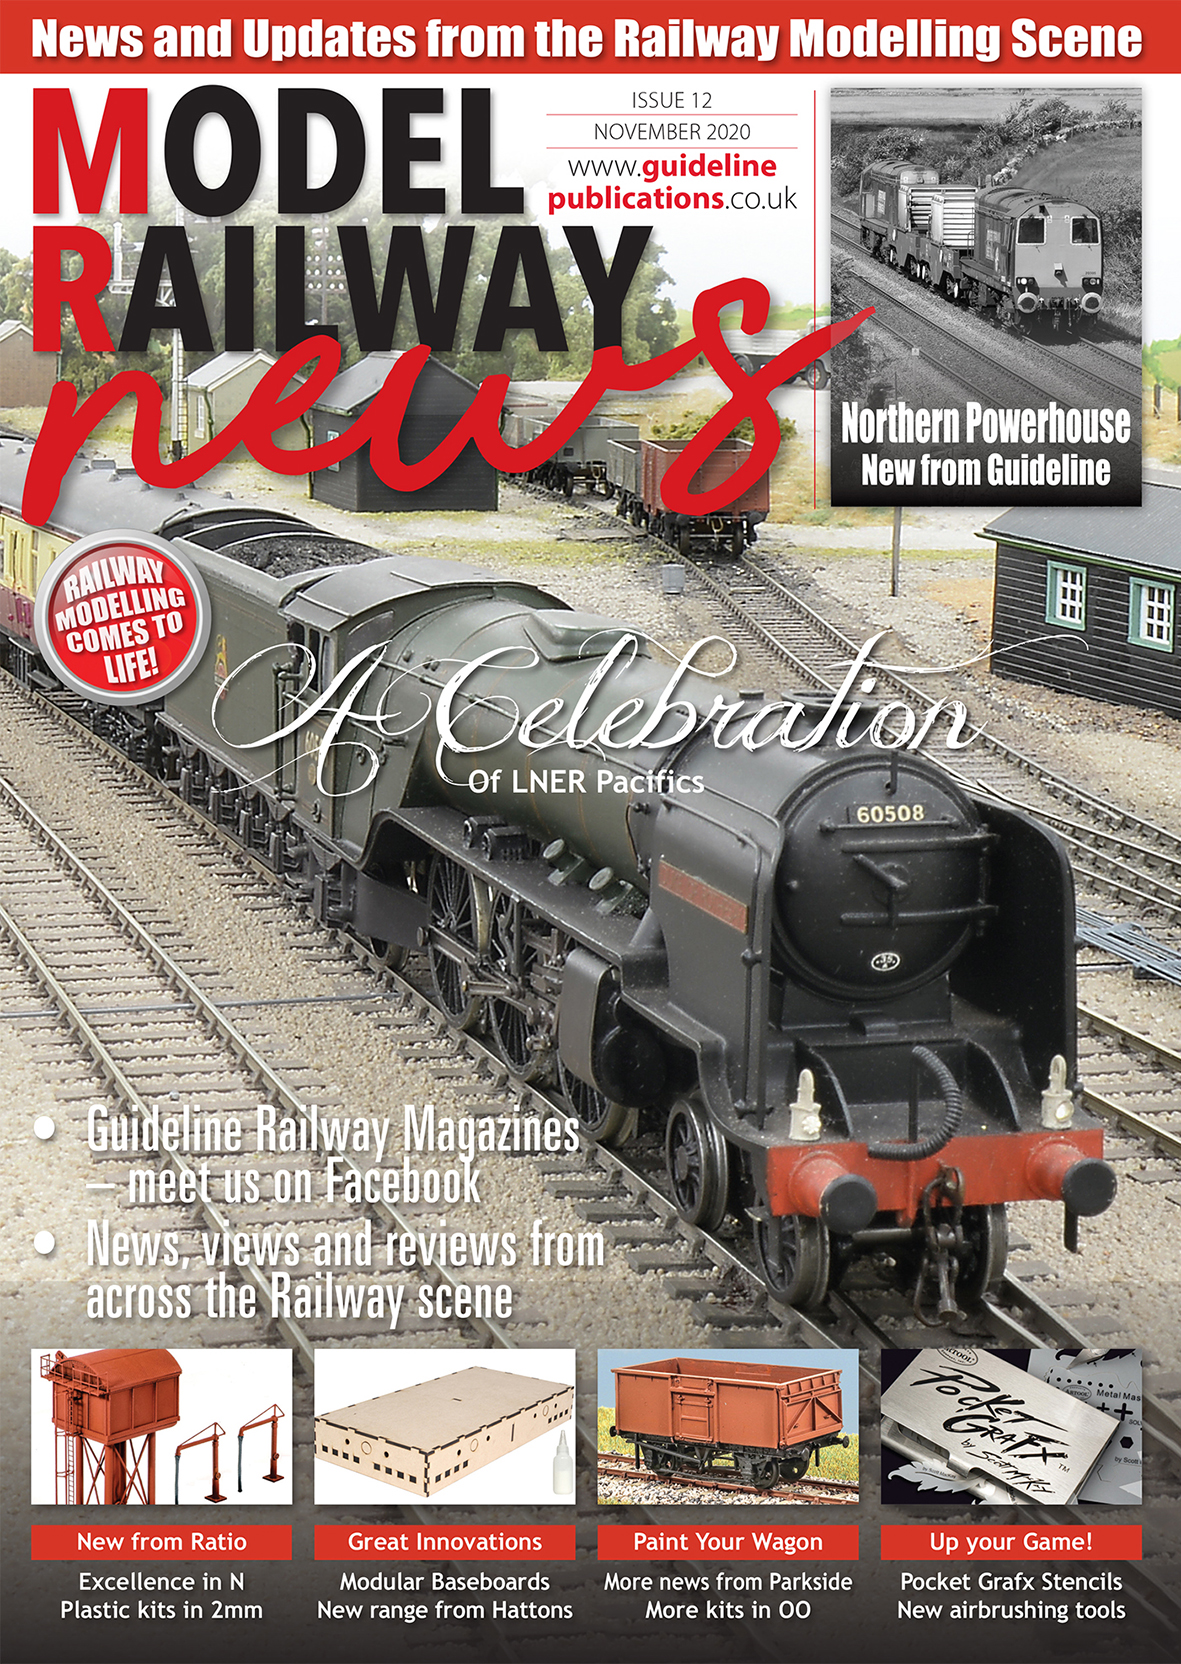 Guideline Publications Model Railway News issue 12 FREE DIGITAL ISSUE - November 